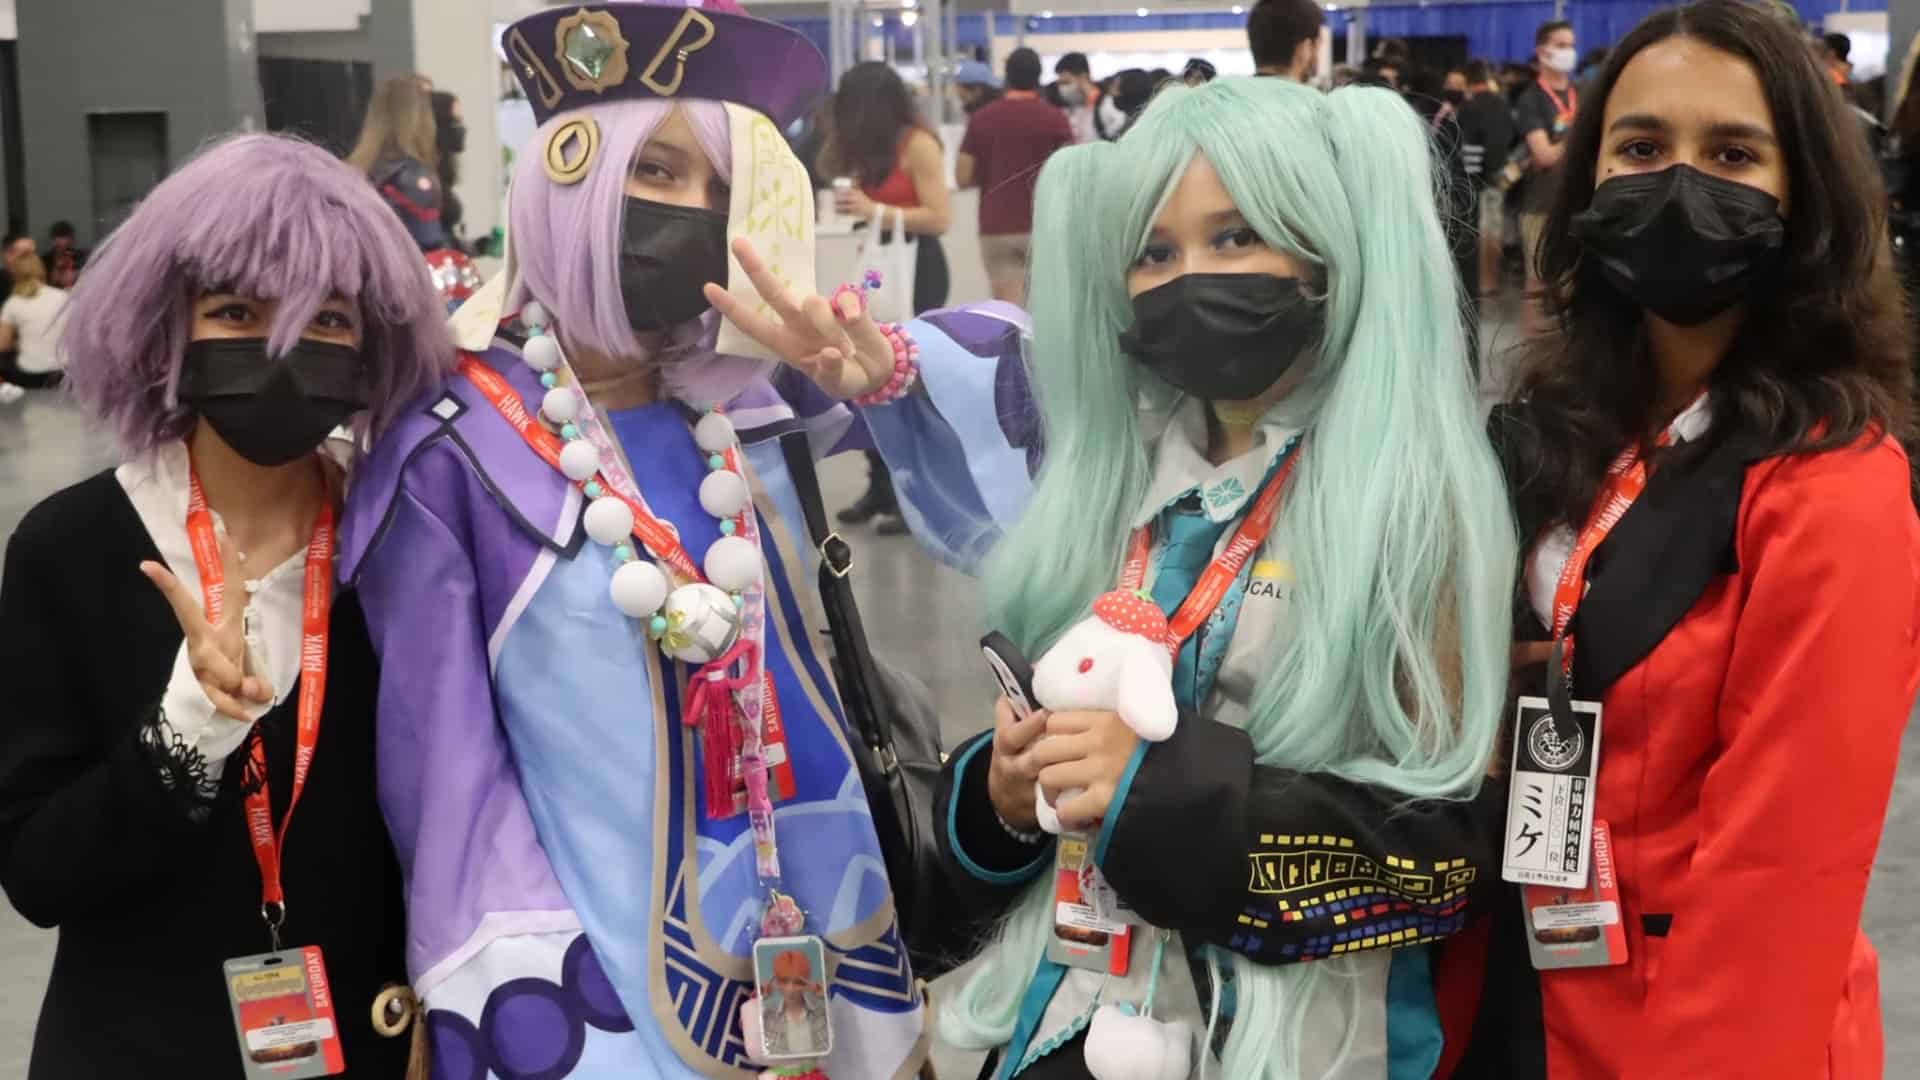 Anime Convention comes to St. Pete - That's So Tampa